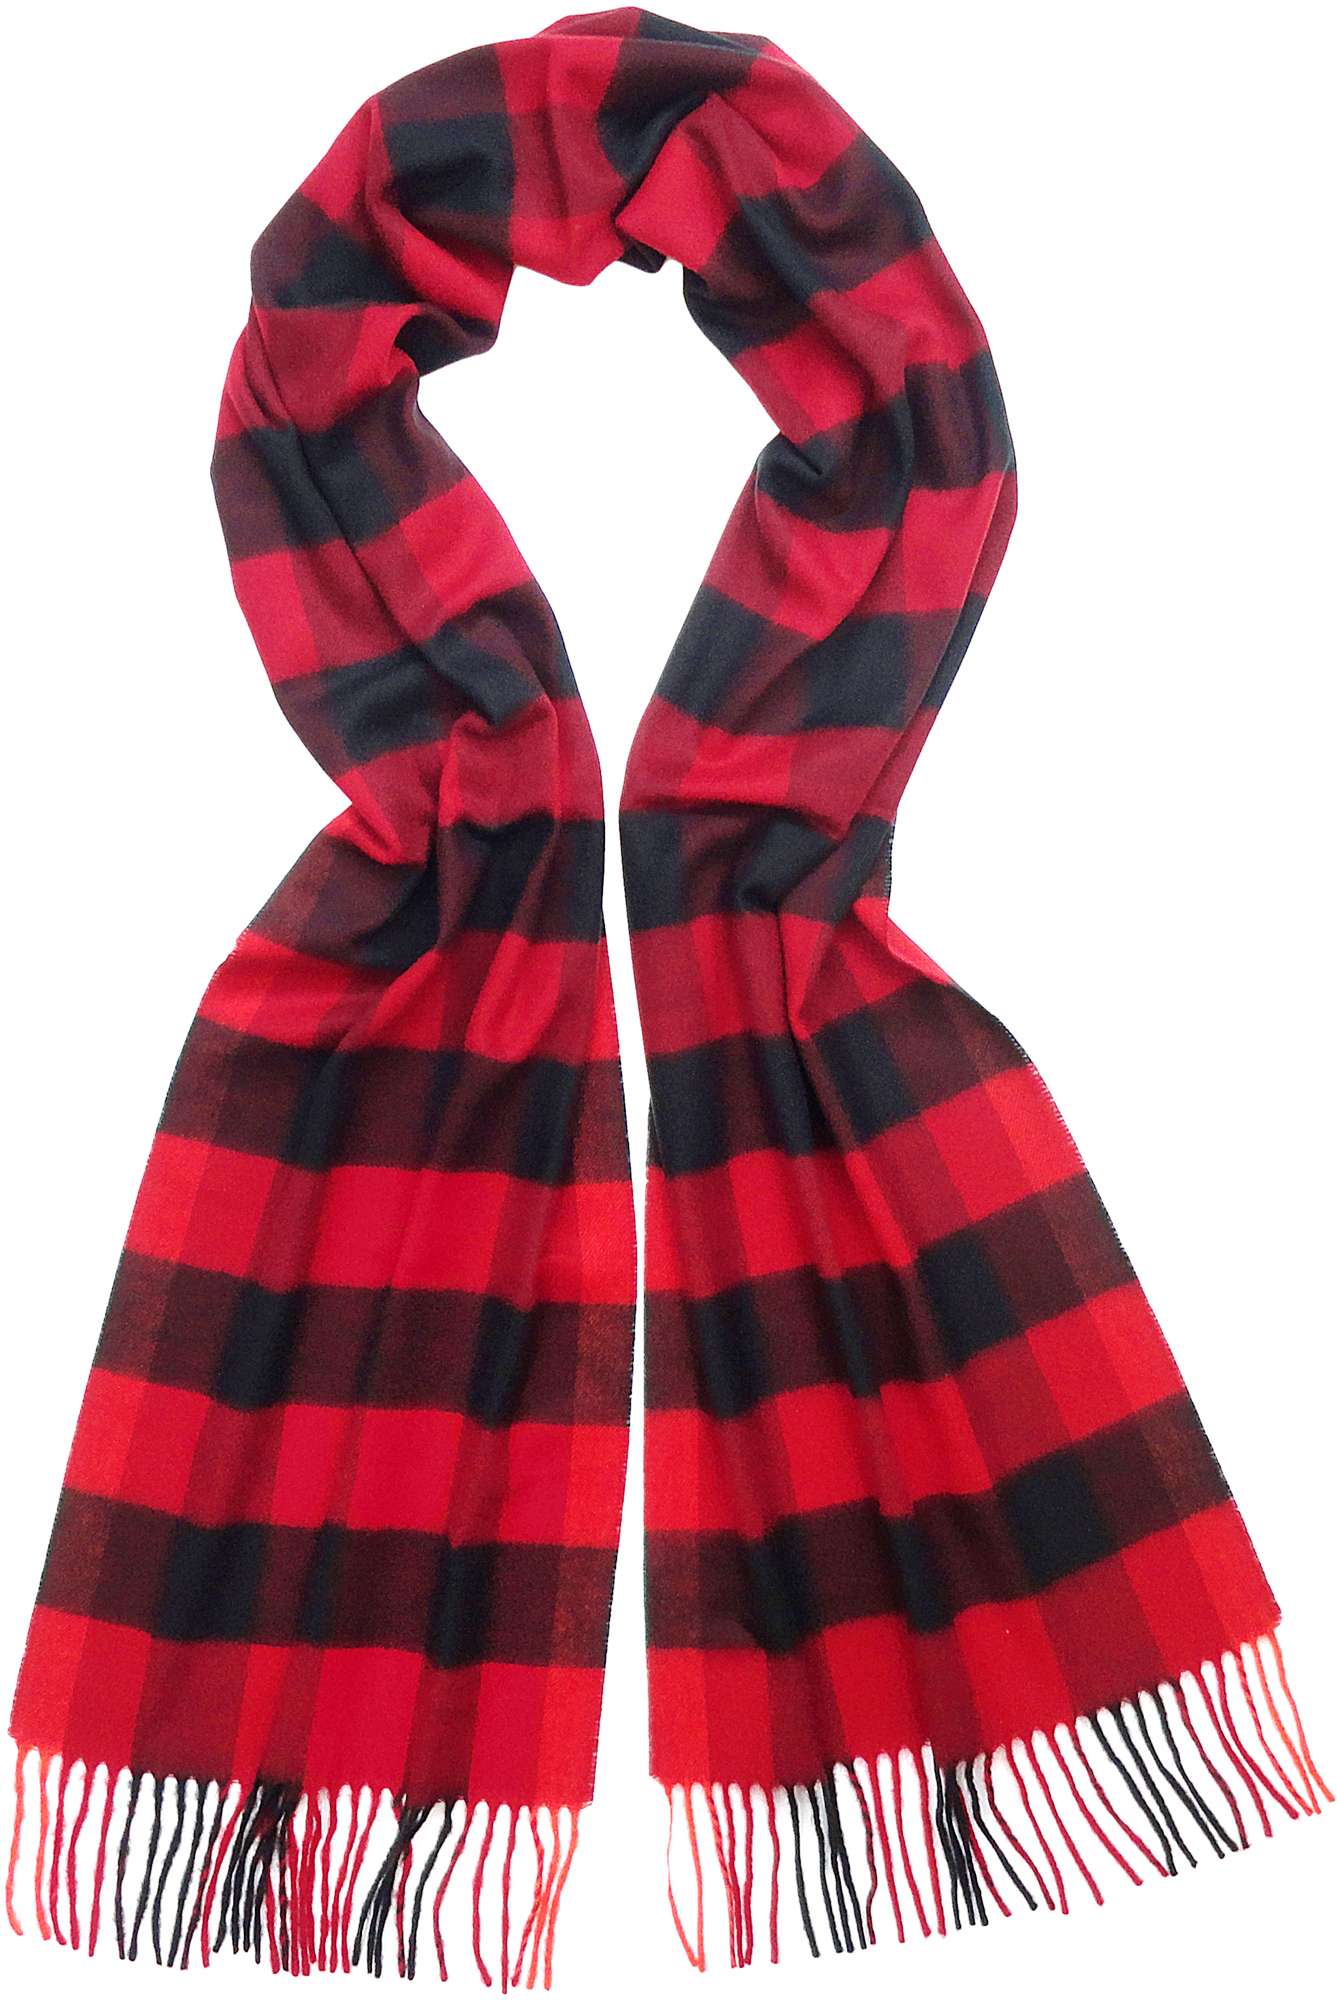 Buffalo Check in Black&Red- $35.00 
Cashmink, Made in Germany
771899116065